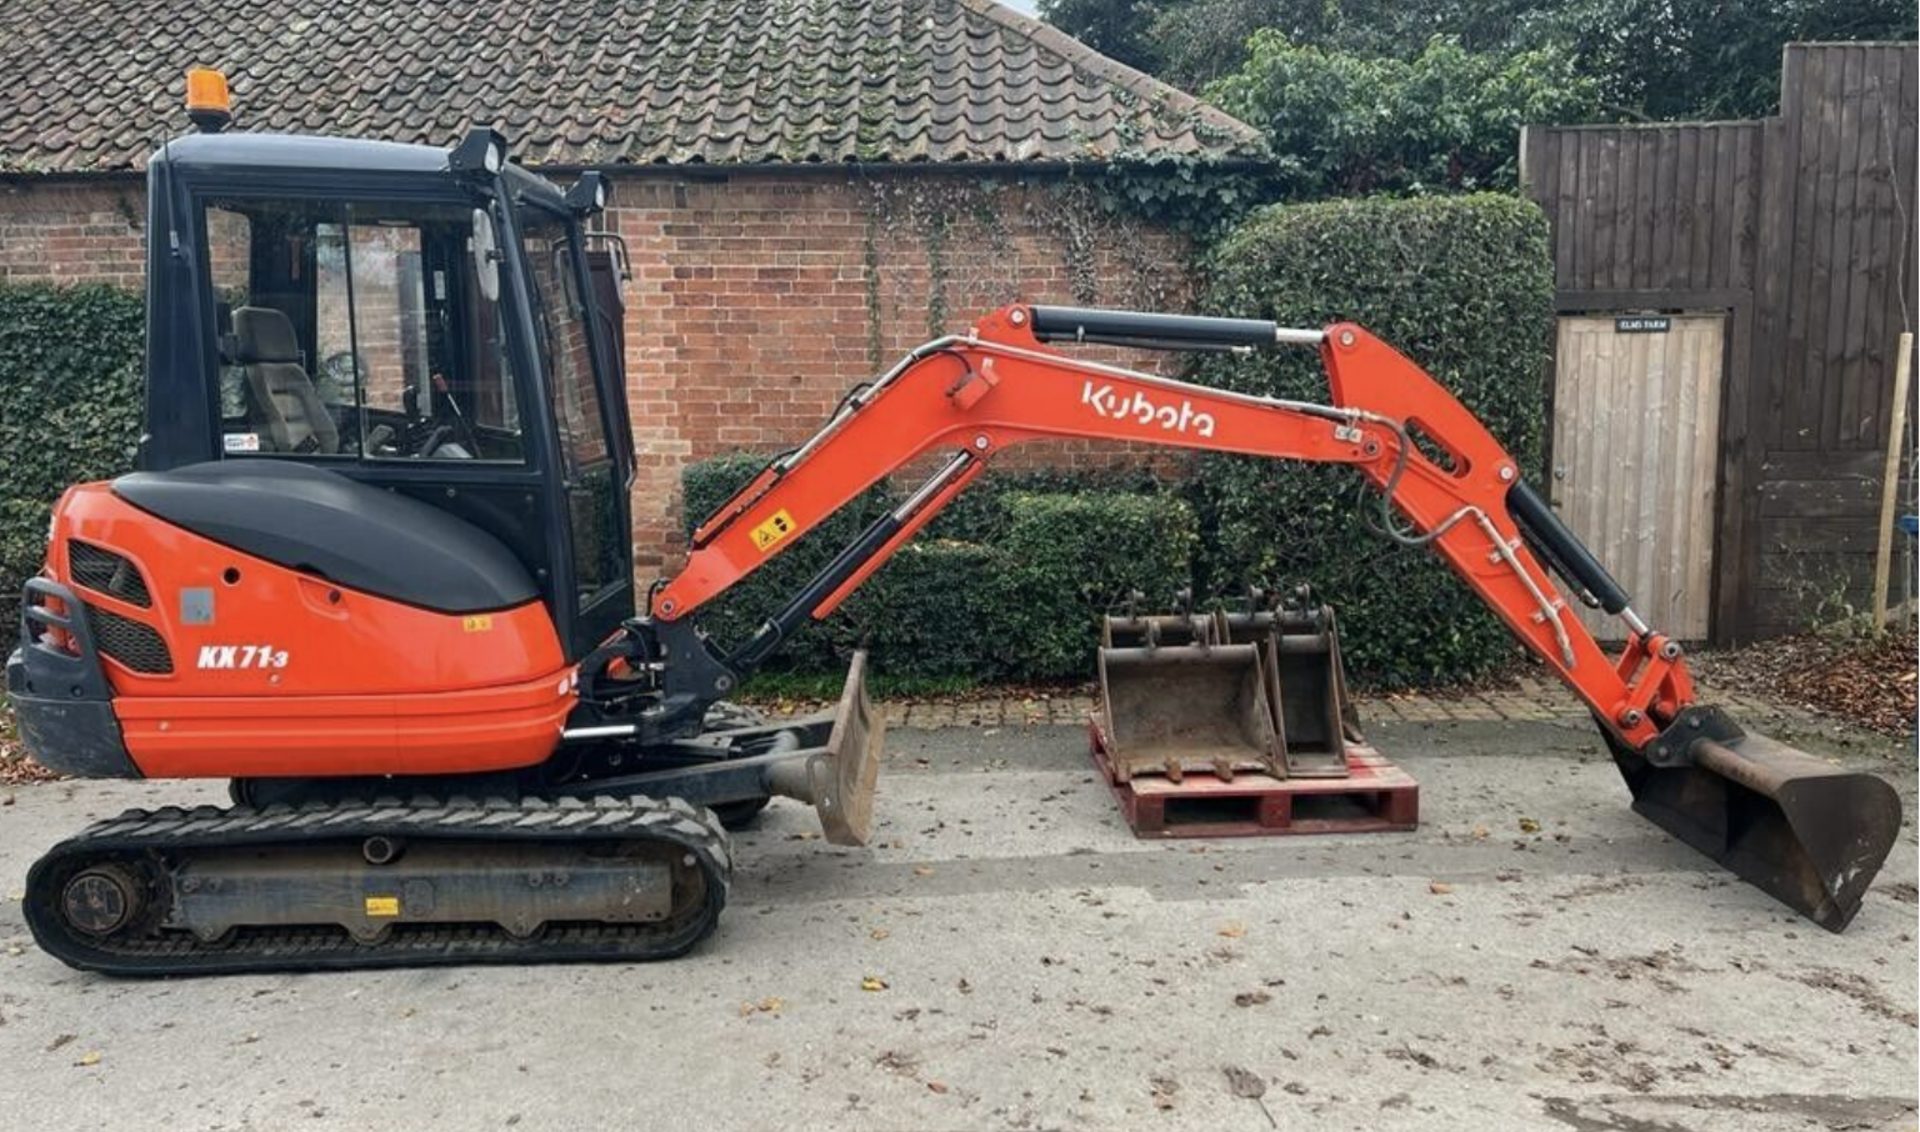 KUBOTA KX71.3 DIGGER EXCAVATOR 2015  ONLY 1787 HOURS FULL CAB AND 5 BUCKETS !  THIS IS THE BIGGEST - Image 4 of 12